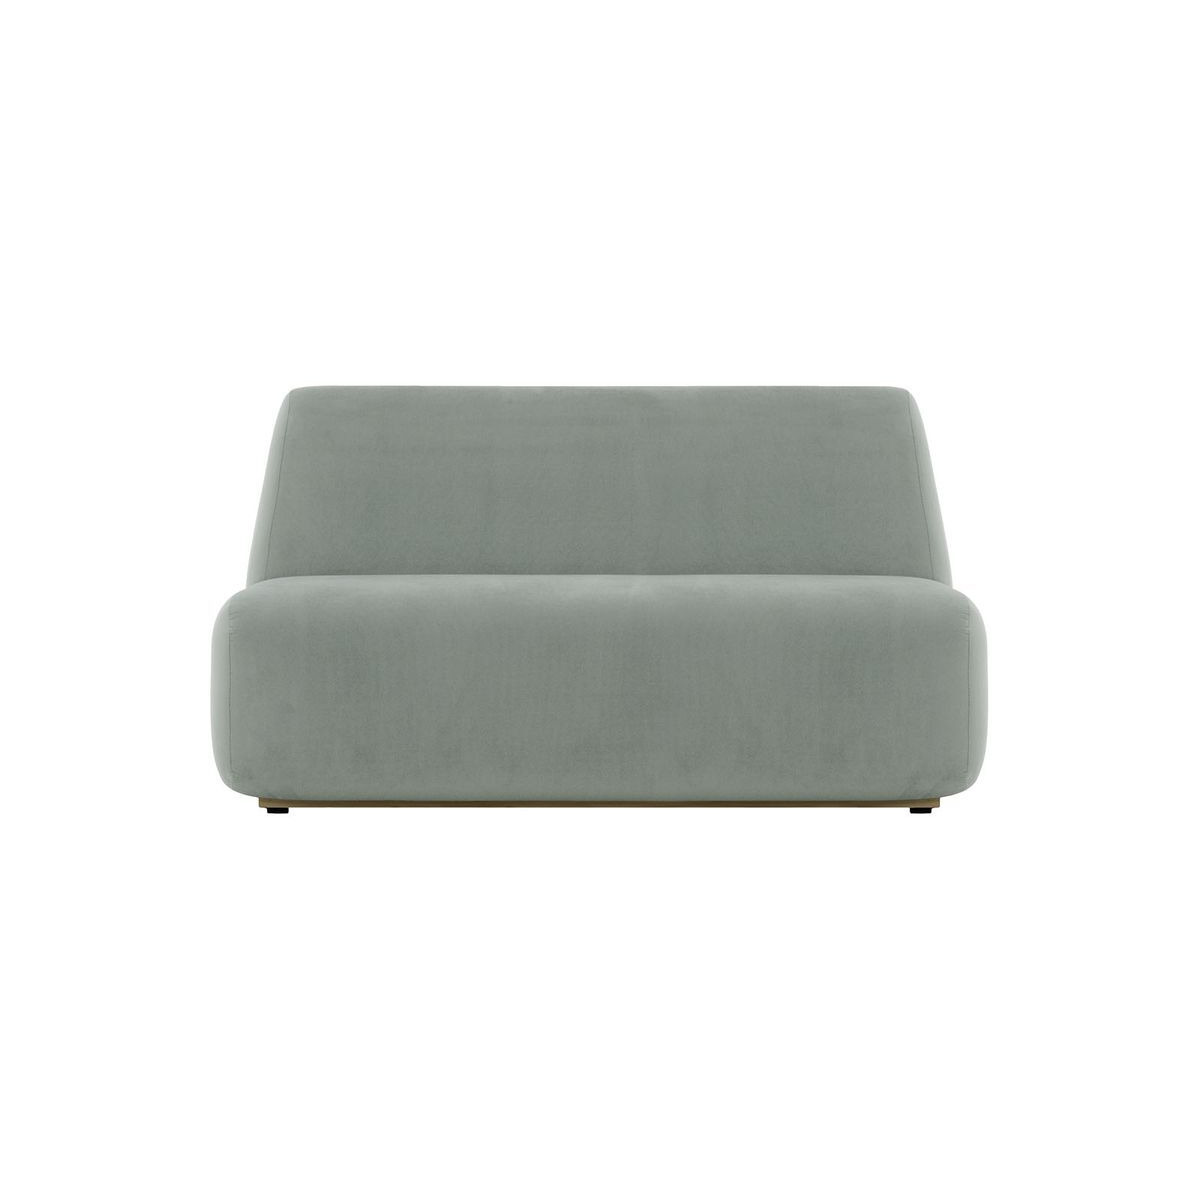 Nist 3 Seater Sofa, silver - image 1